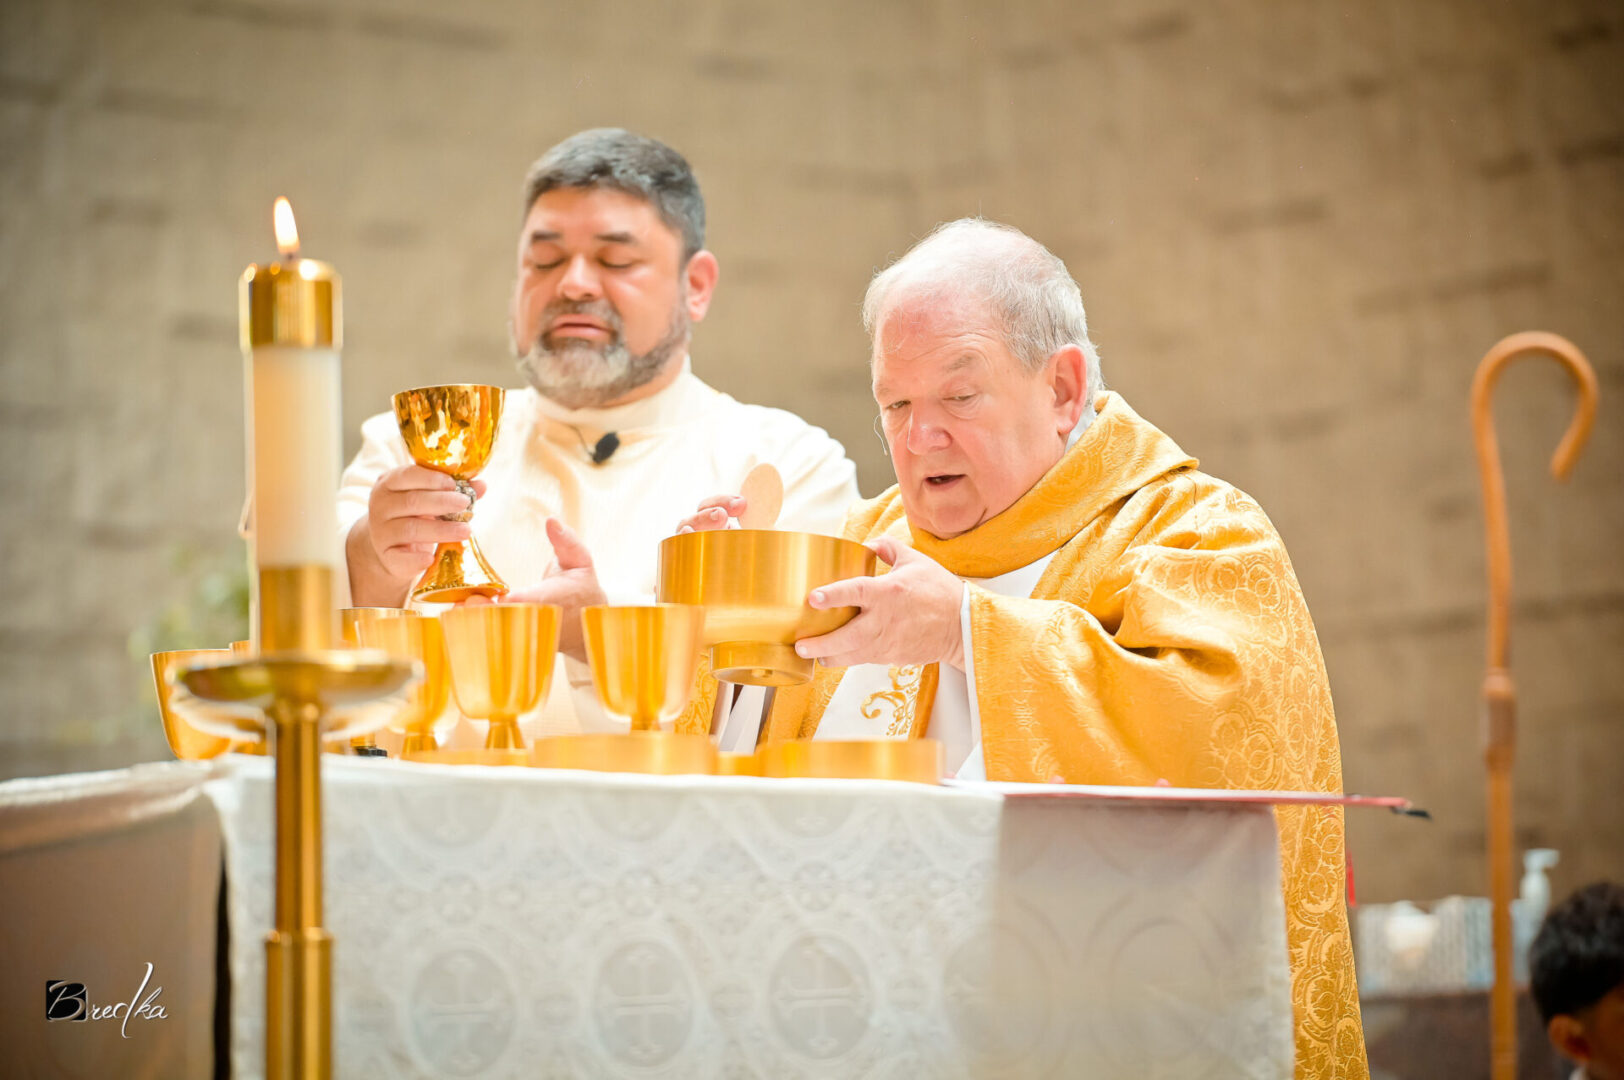 Two priests during a religious ceremony.